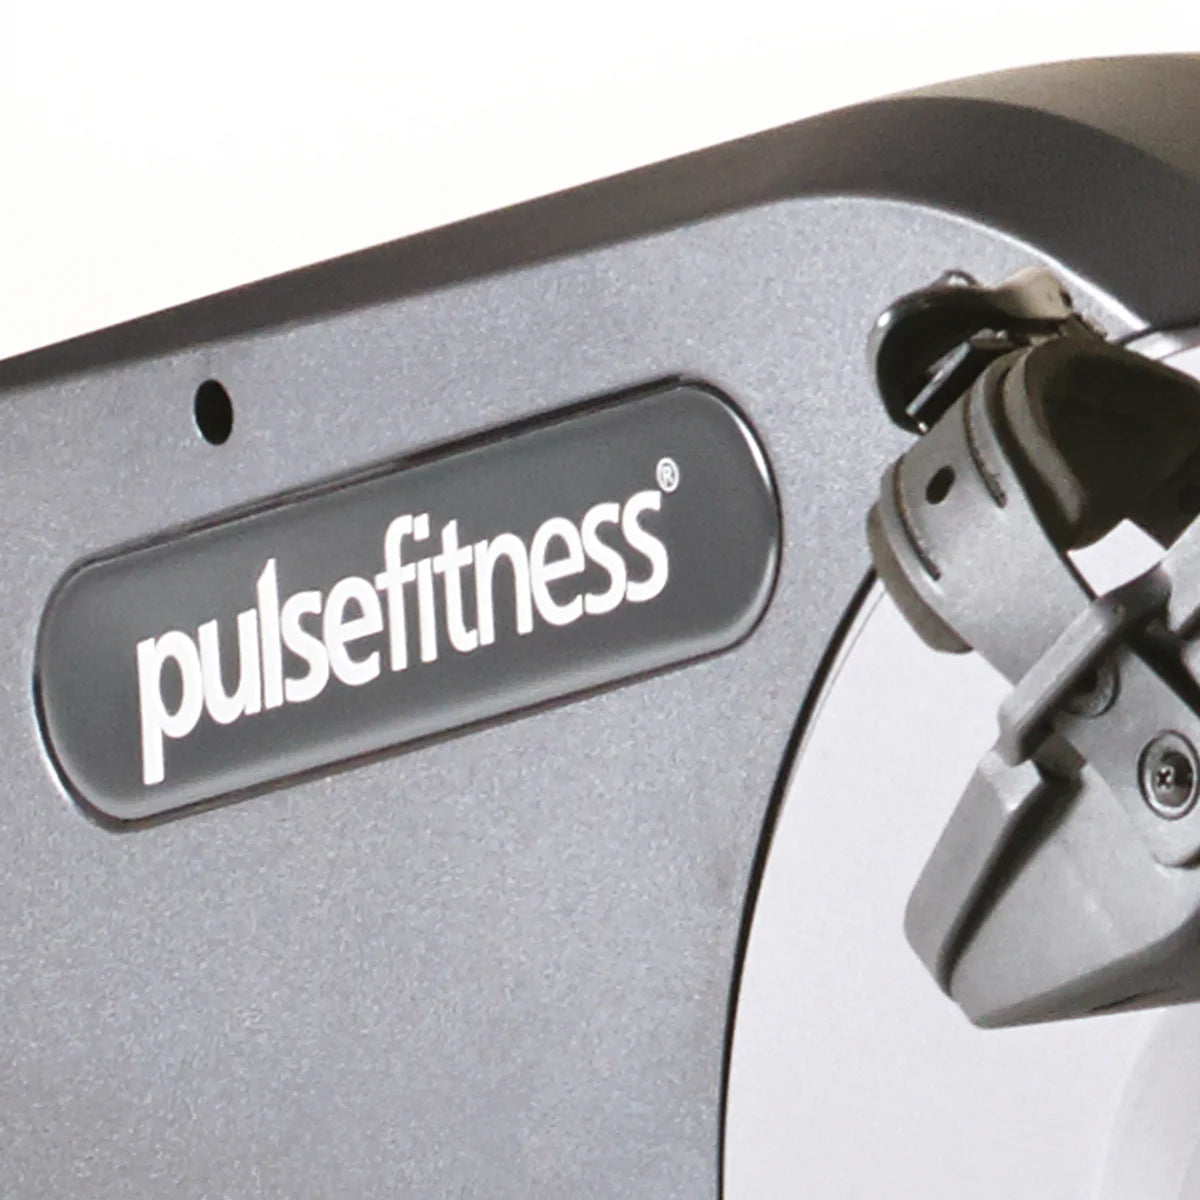 Pulse Fitness Premium Upright Cycle with 18.5" Touchscreen Console